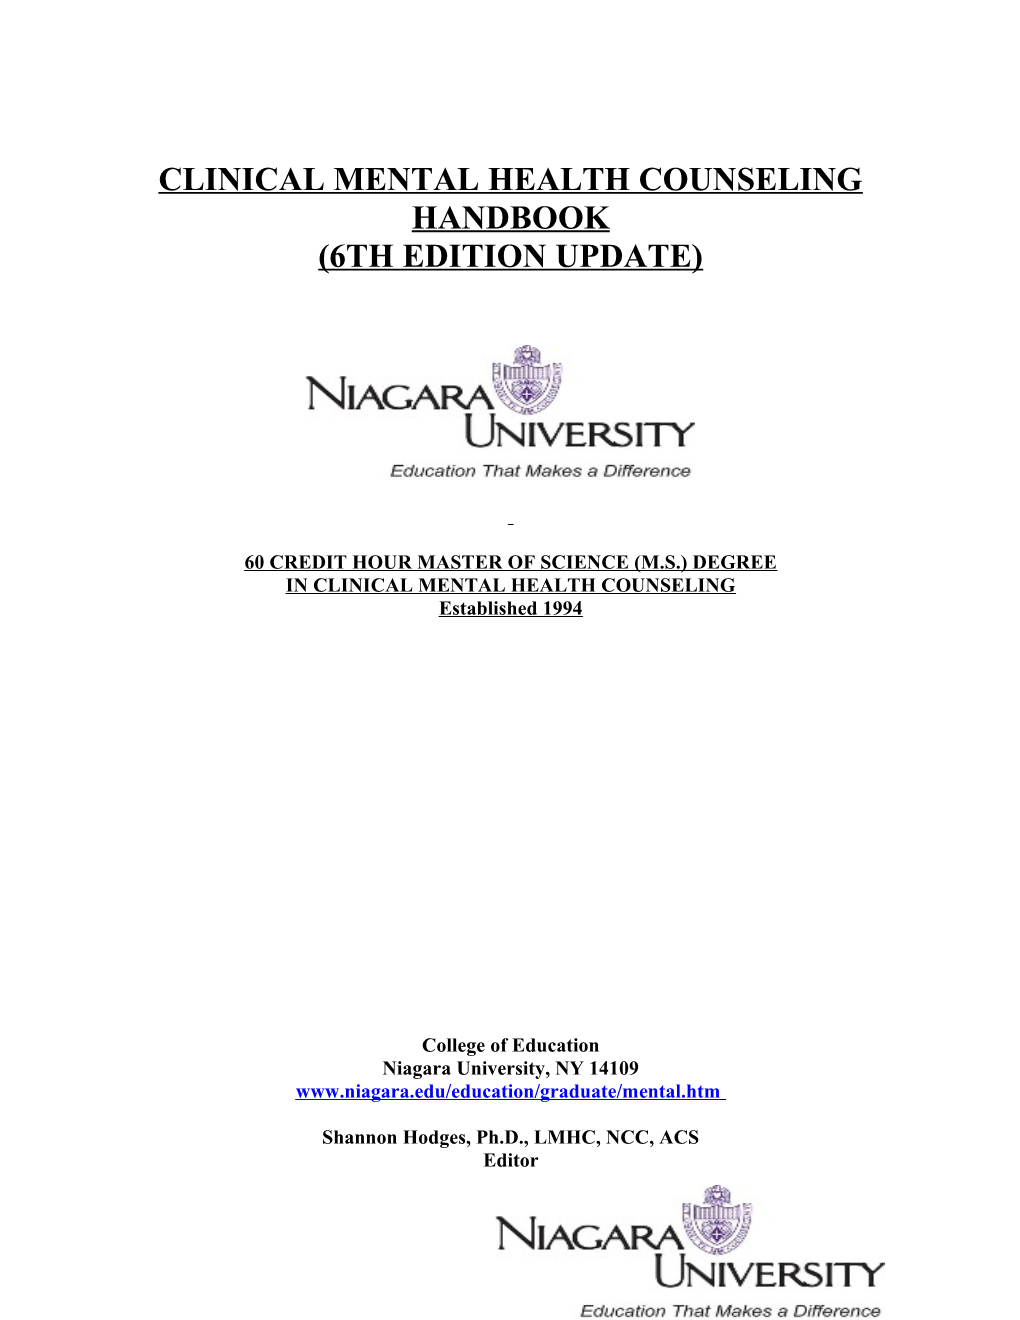 Information Regarding the Mental Health Counseling Profession